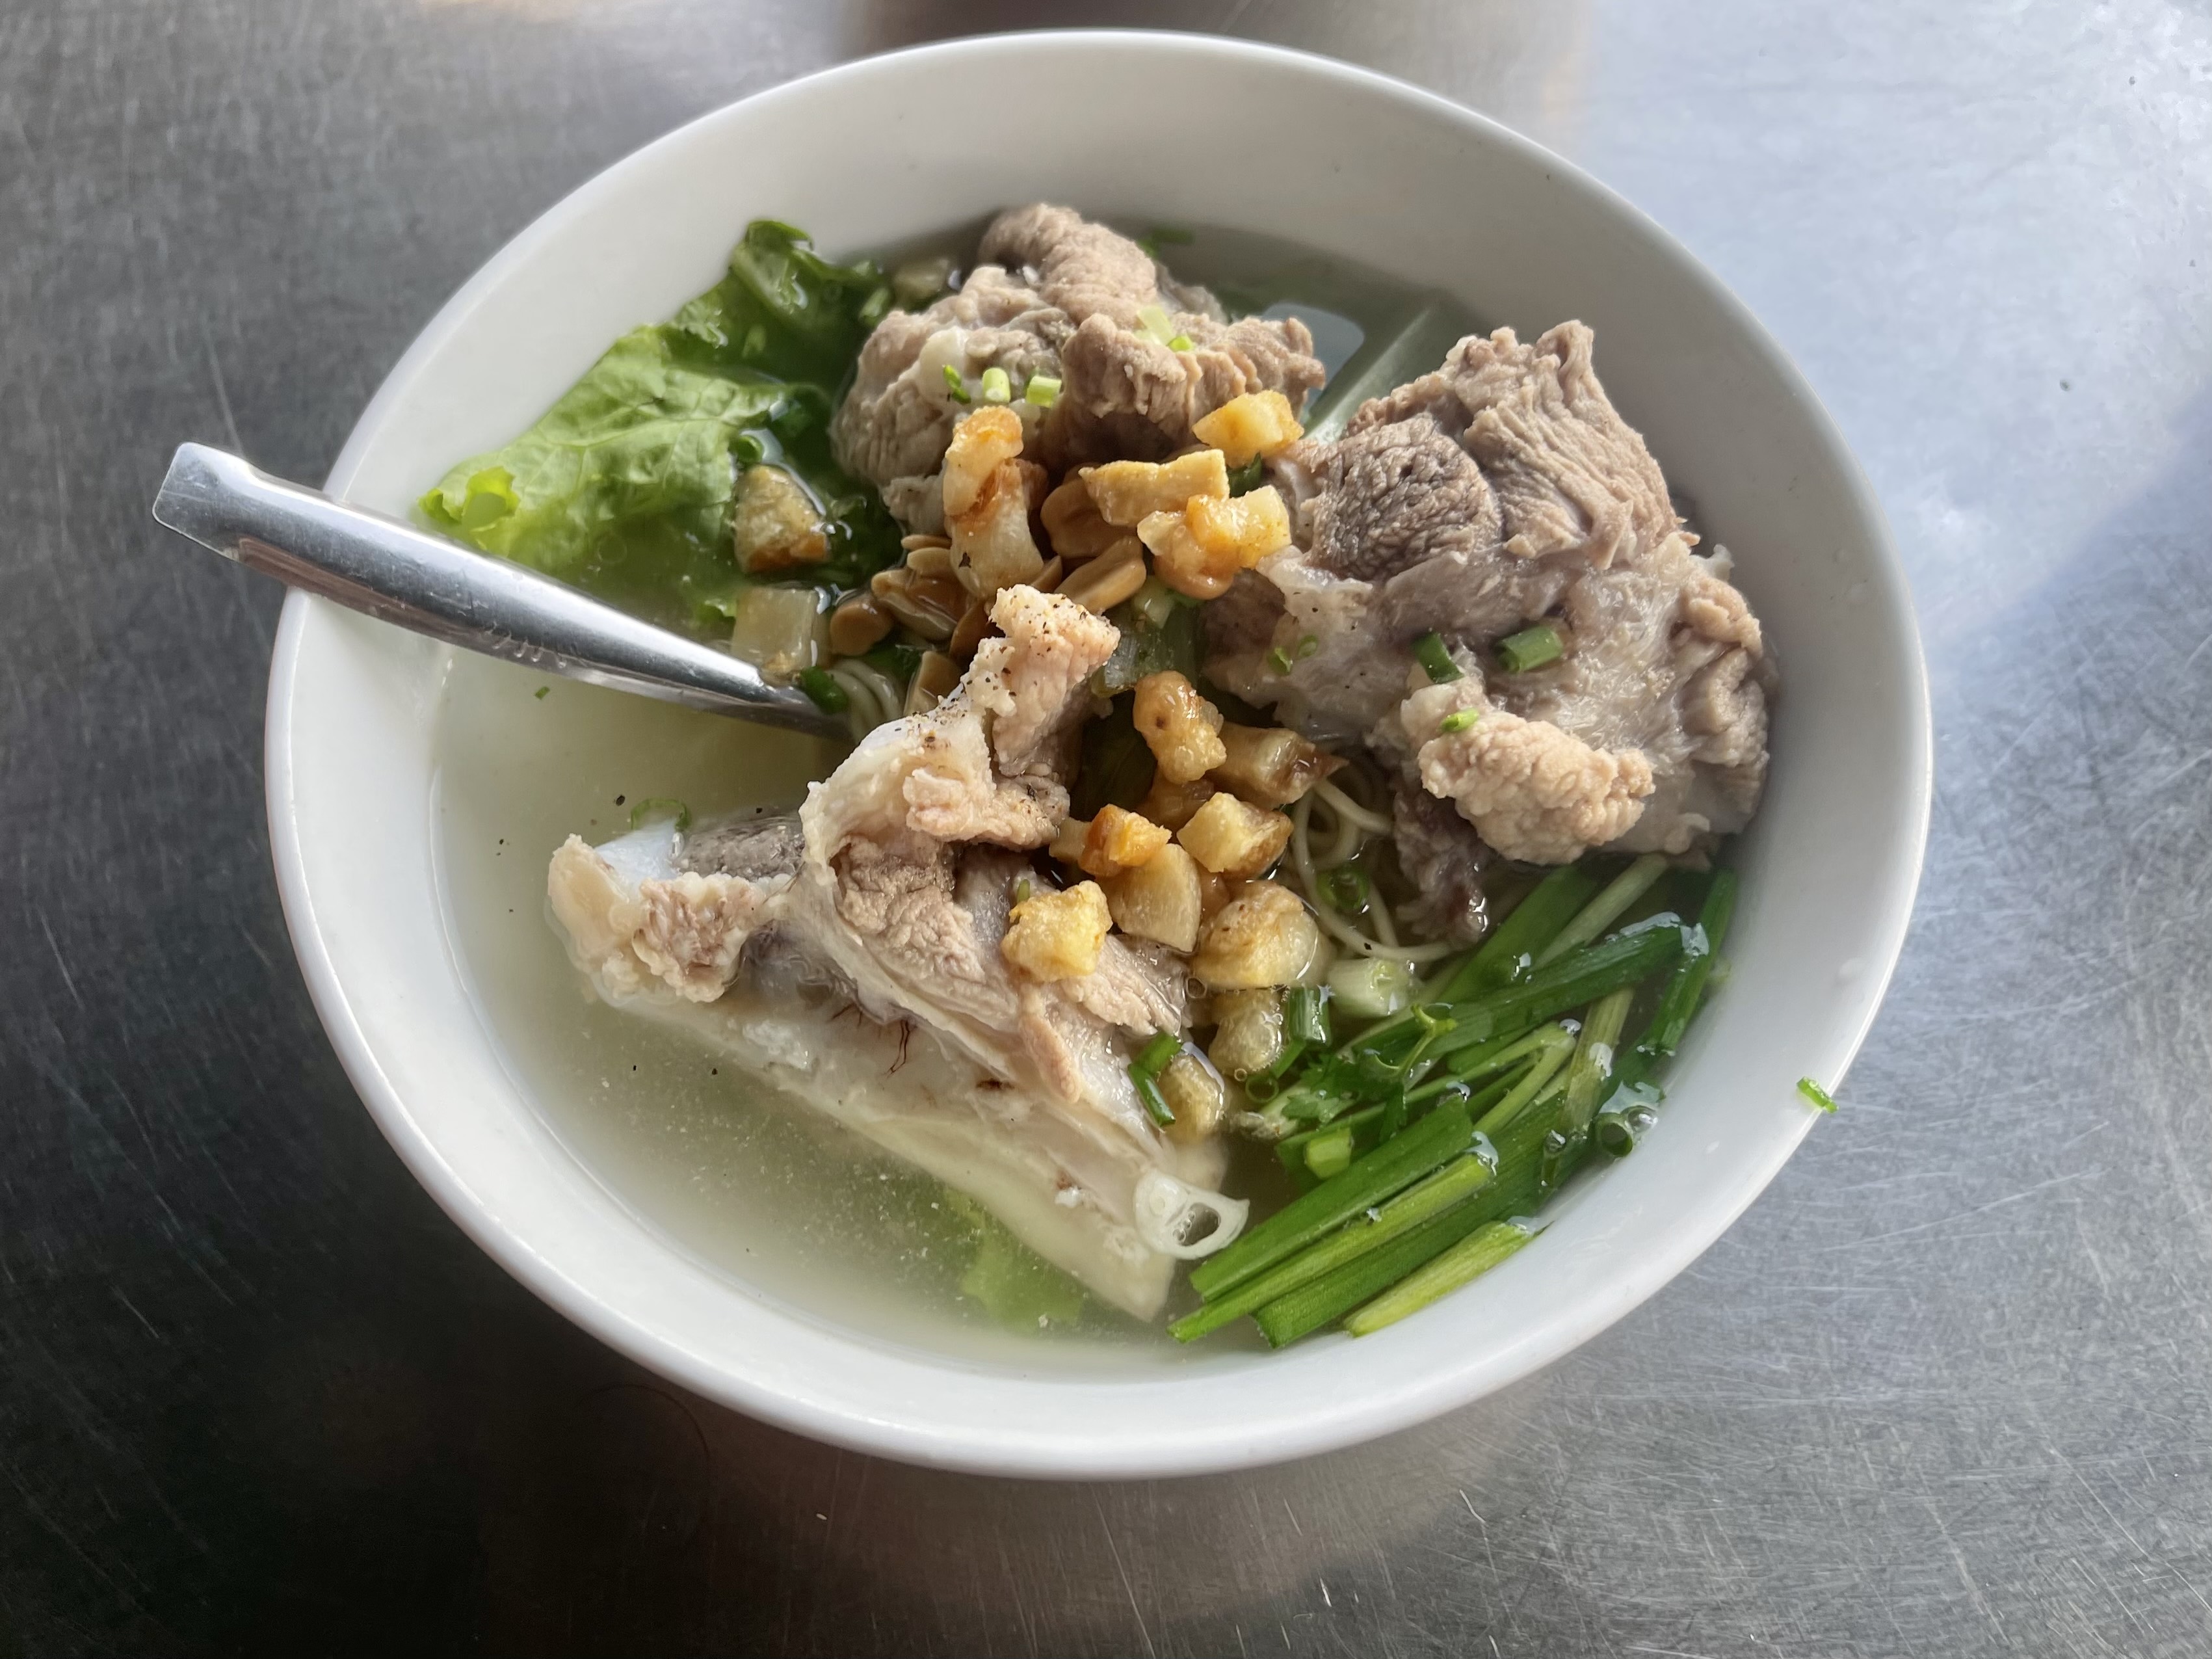 A bowl of 'mi nuoc' (noodles served in broth) at Niu's noodle stall in Binh Thanh District, Ho Chi Minh City. Photo: Jordy Comes Alive / Tuoi Tre News